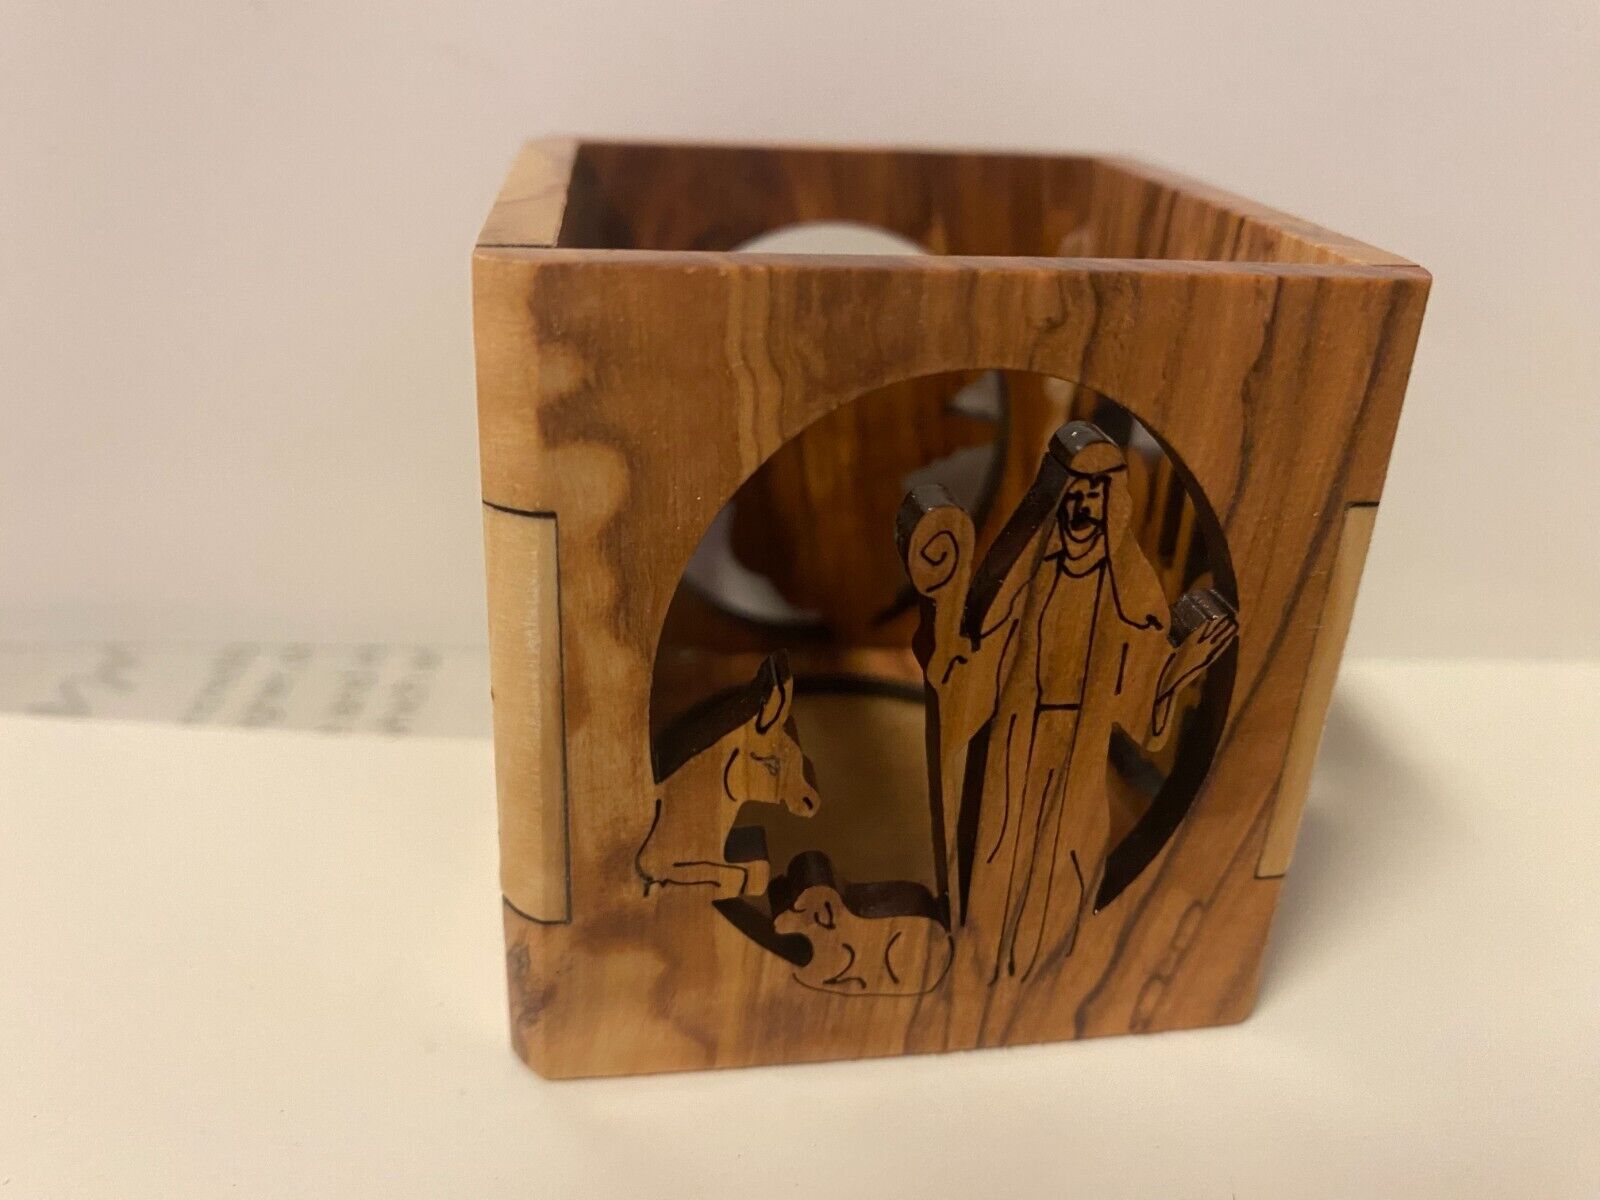 Olive Wood 4 images 2.25" Votive Holder, New from Bethlehem - Bob and Penny Lord